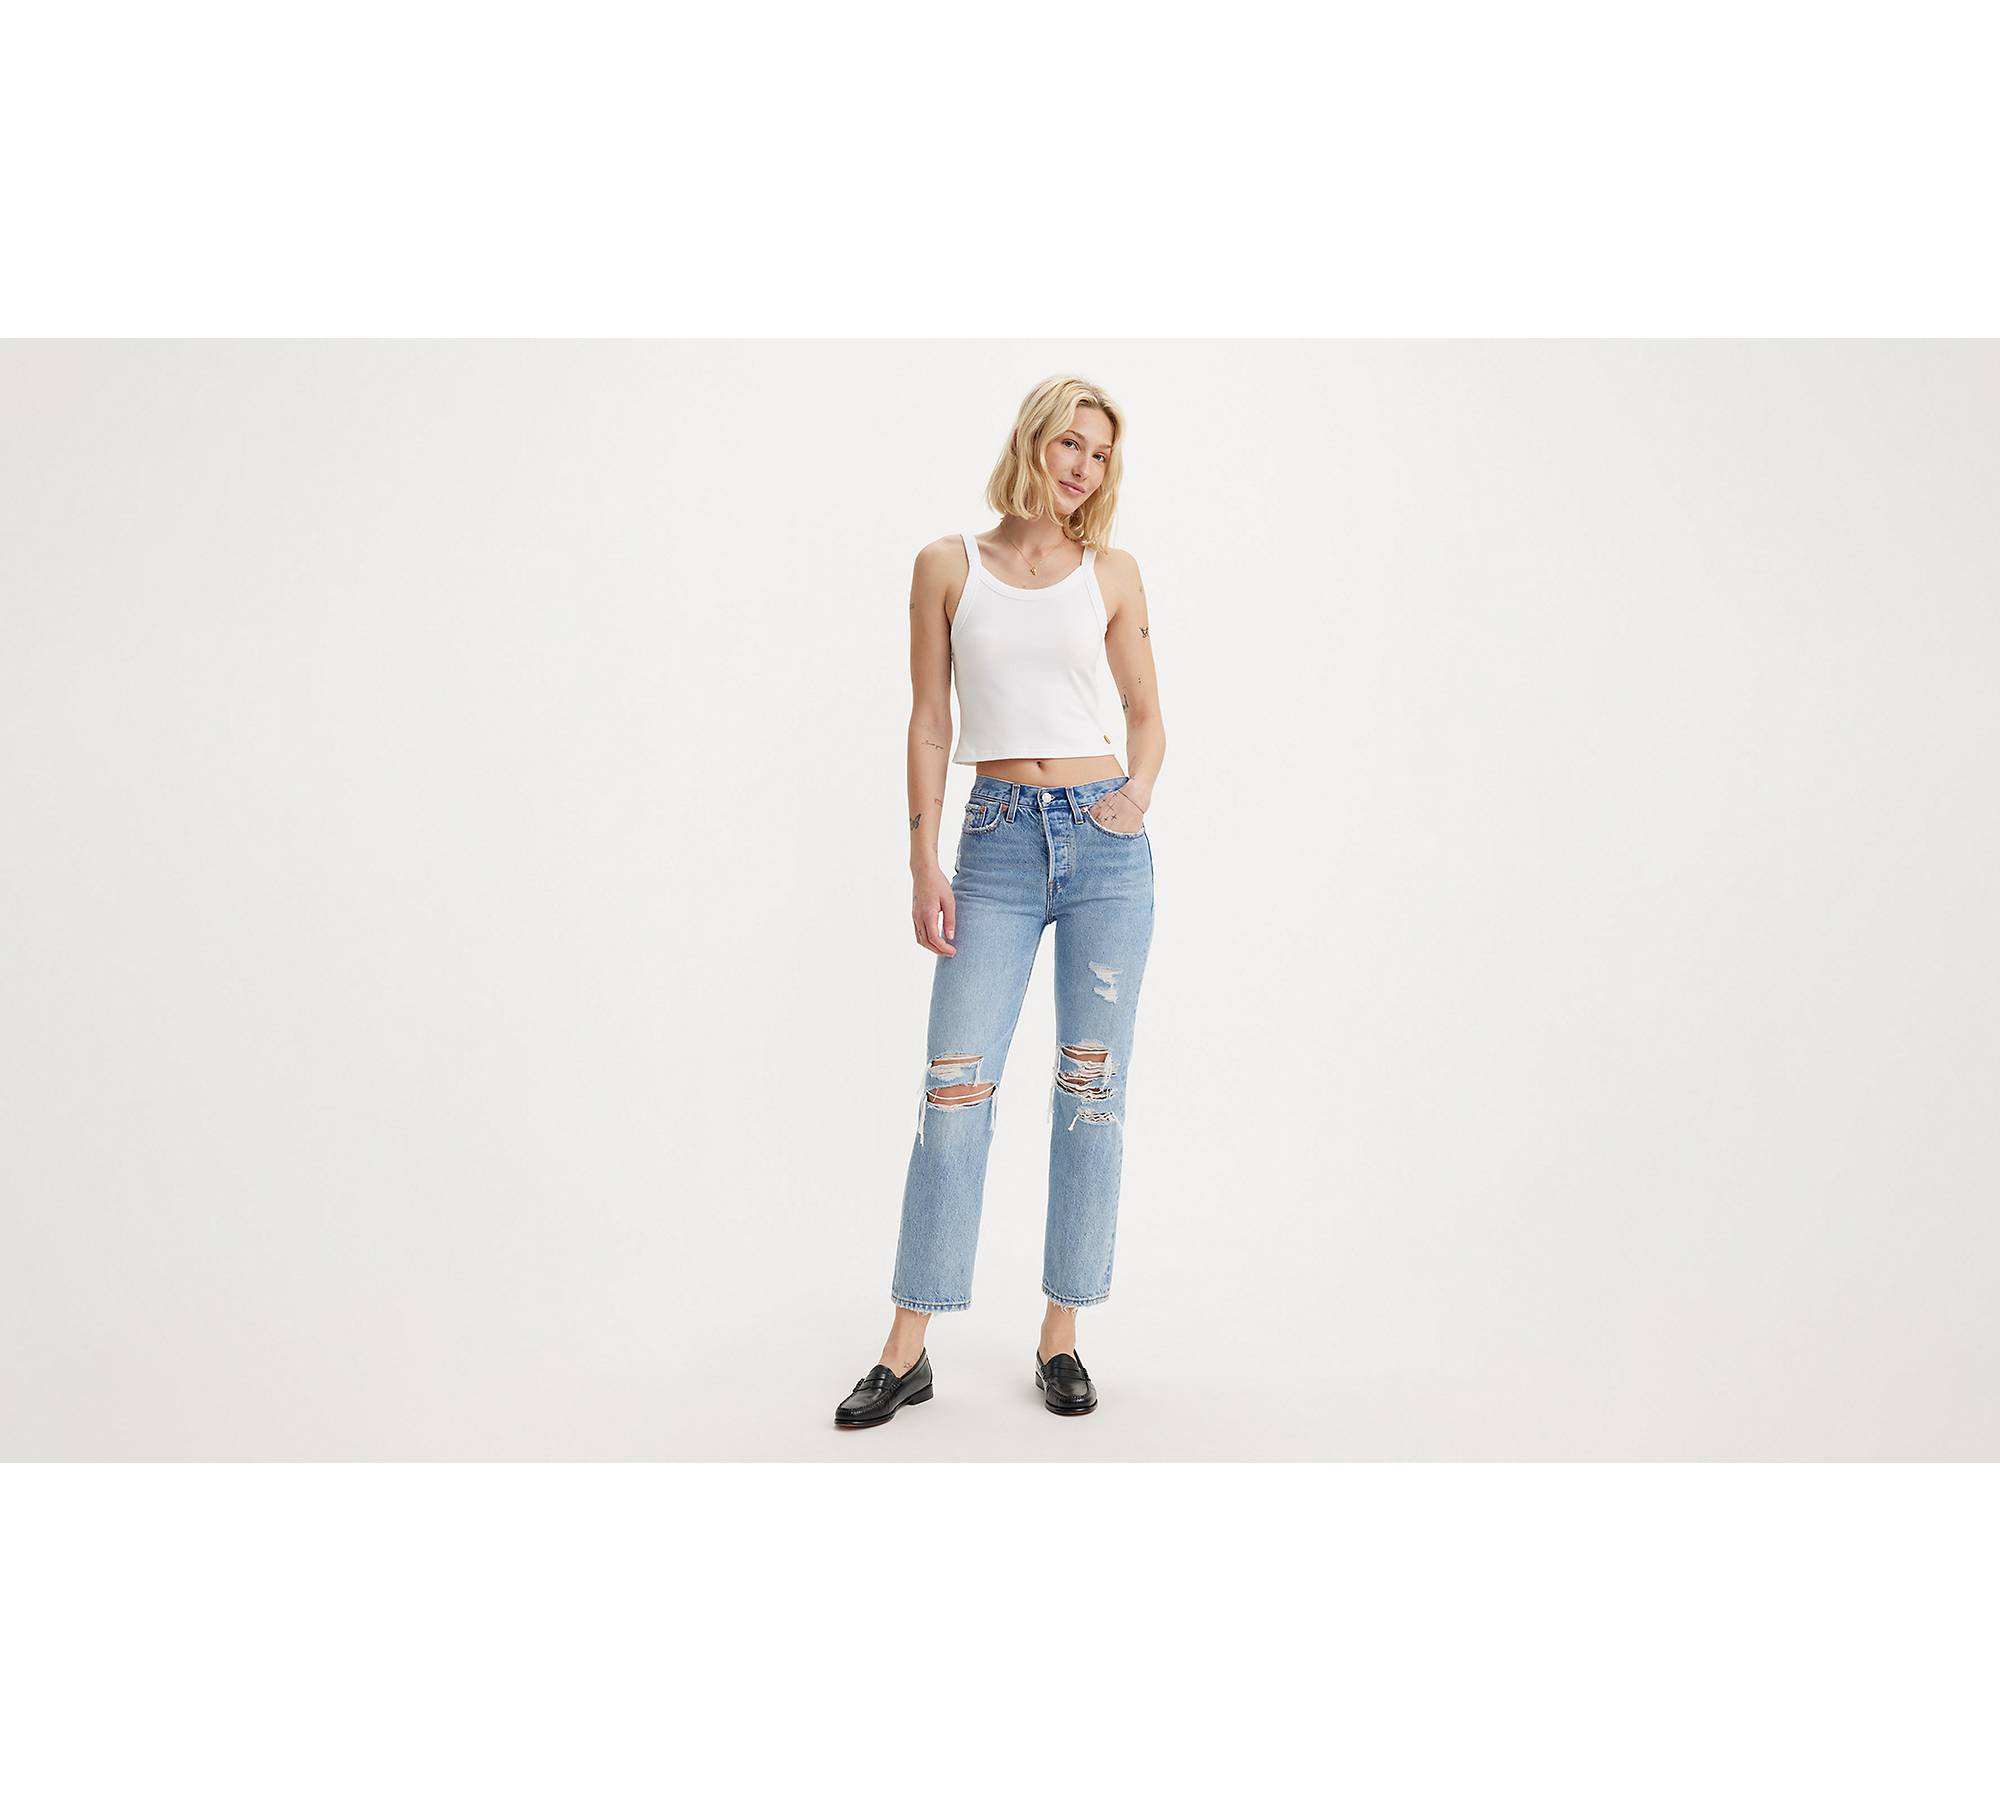 The Wedgie Straight Jeans by Levi's - Christina – THE SKINNY